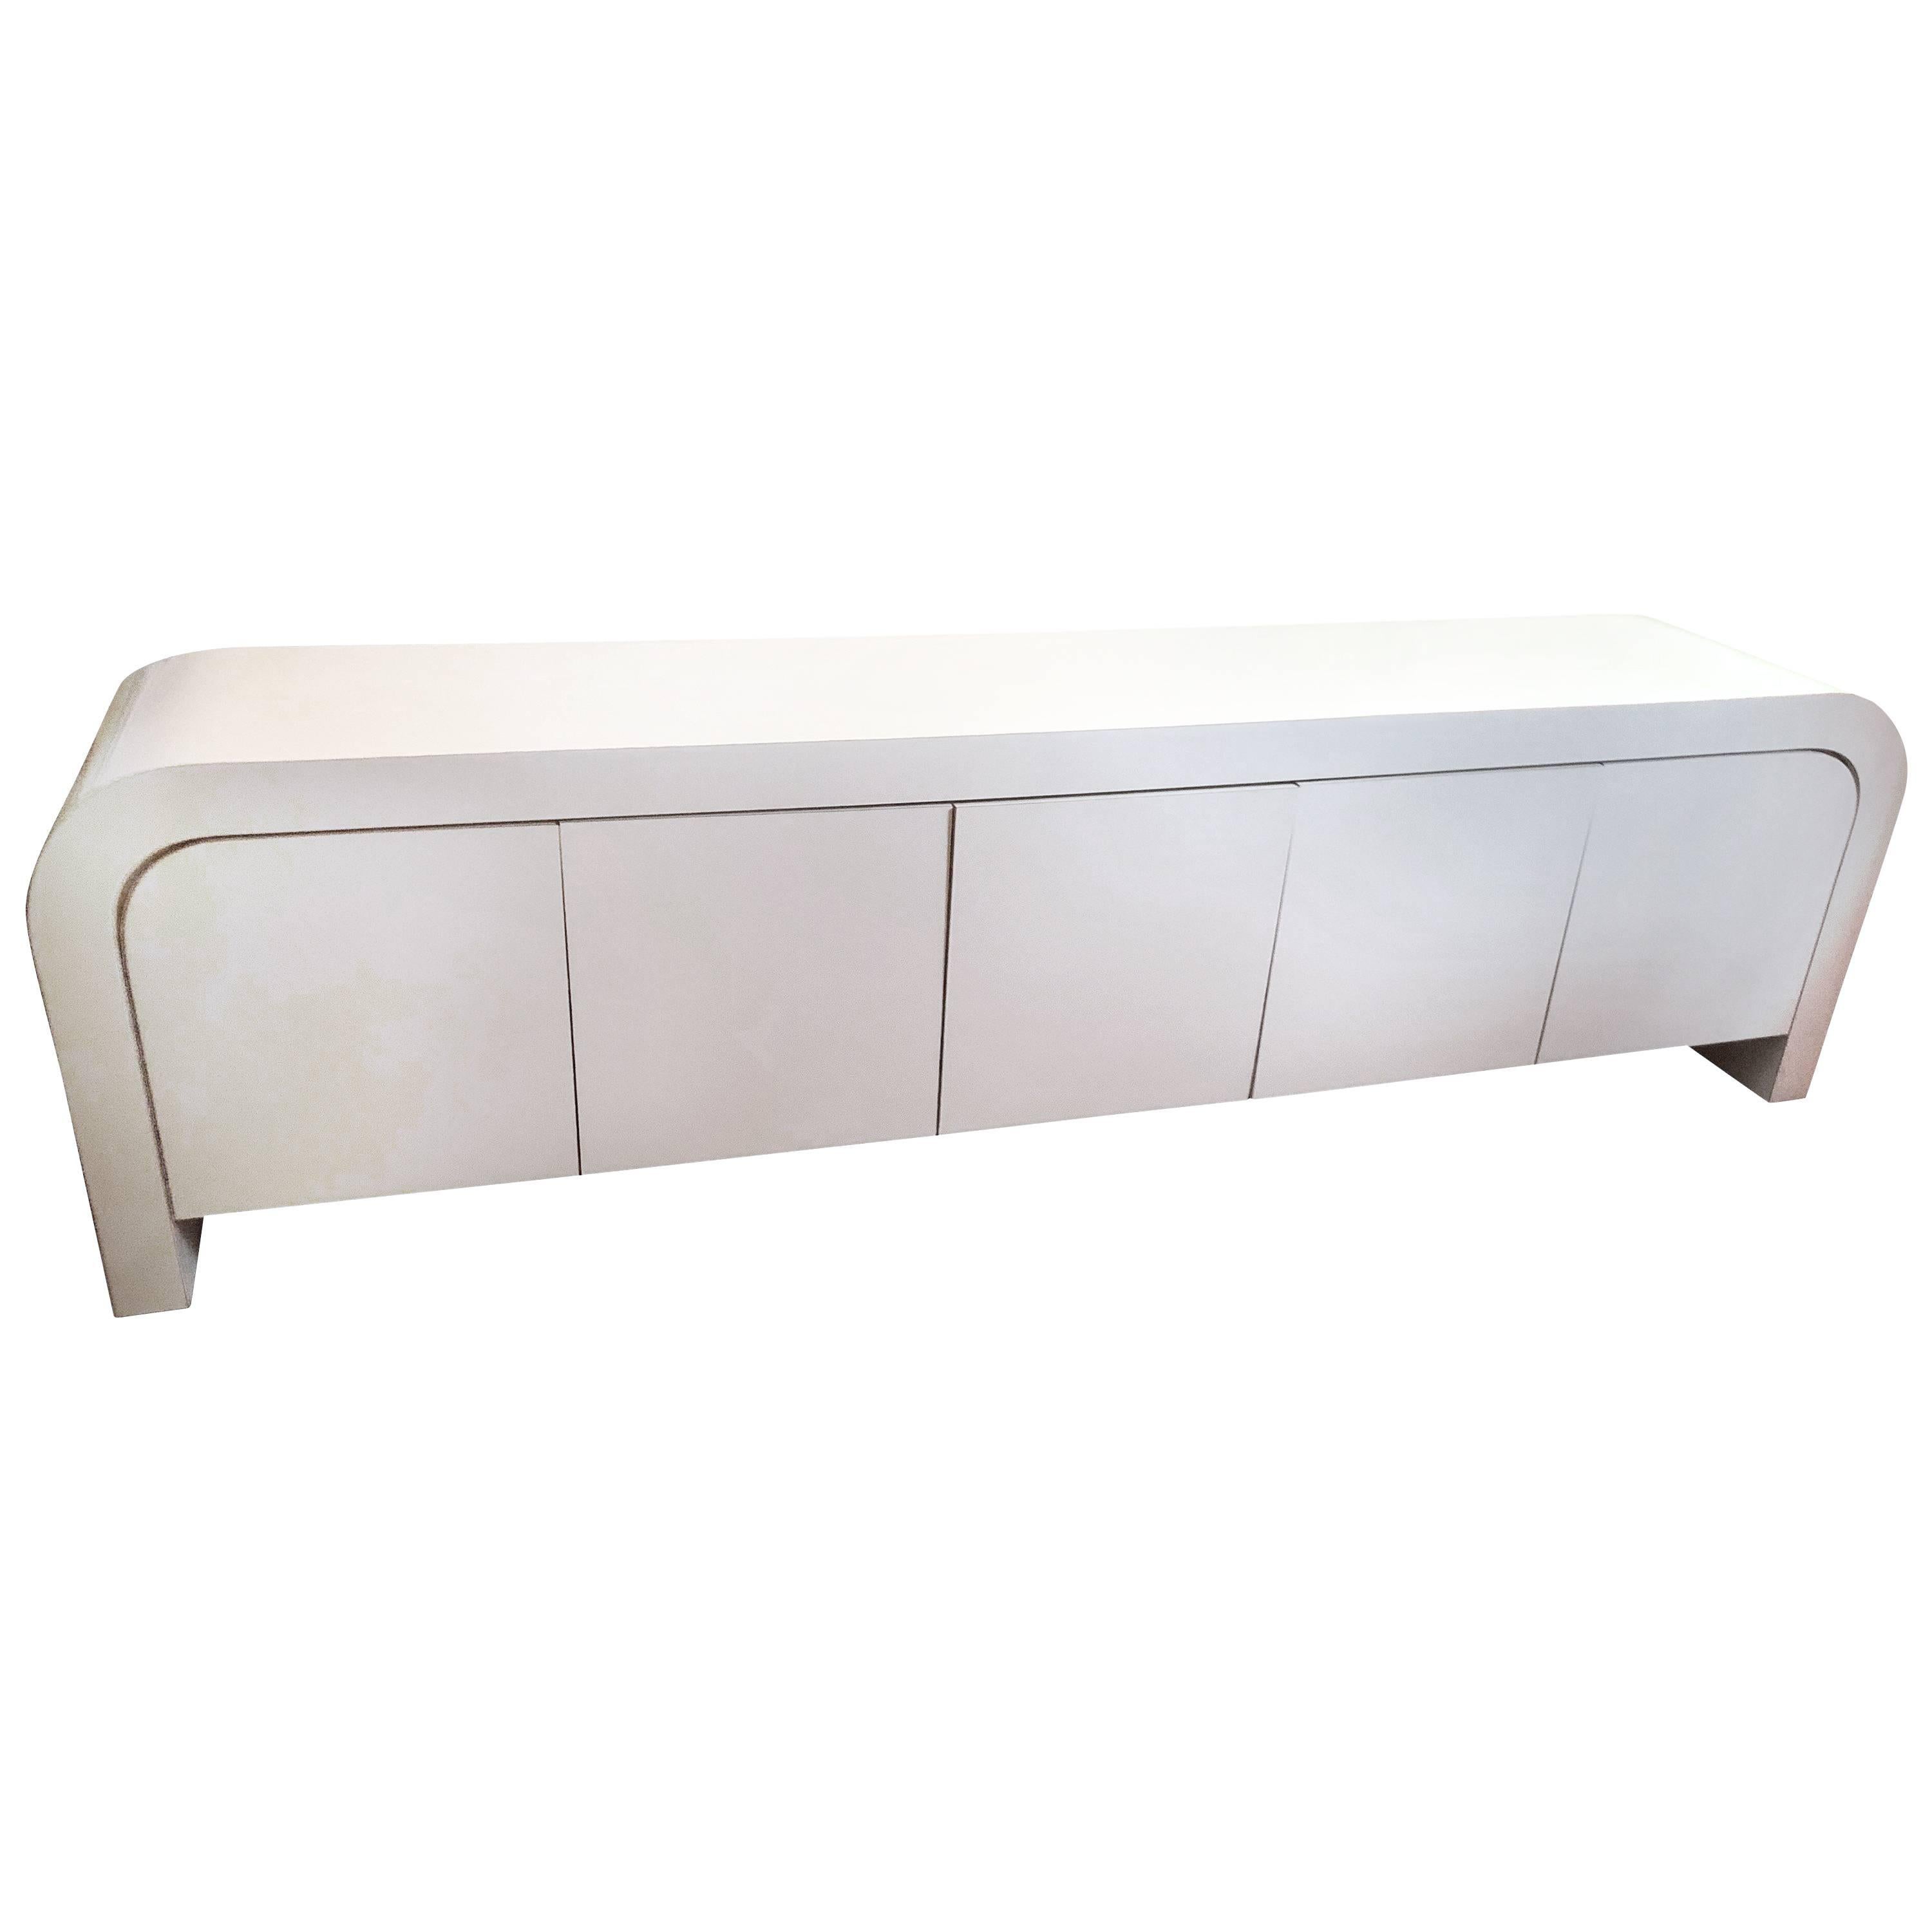 Ello Style Waterfall Credenza in off White